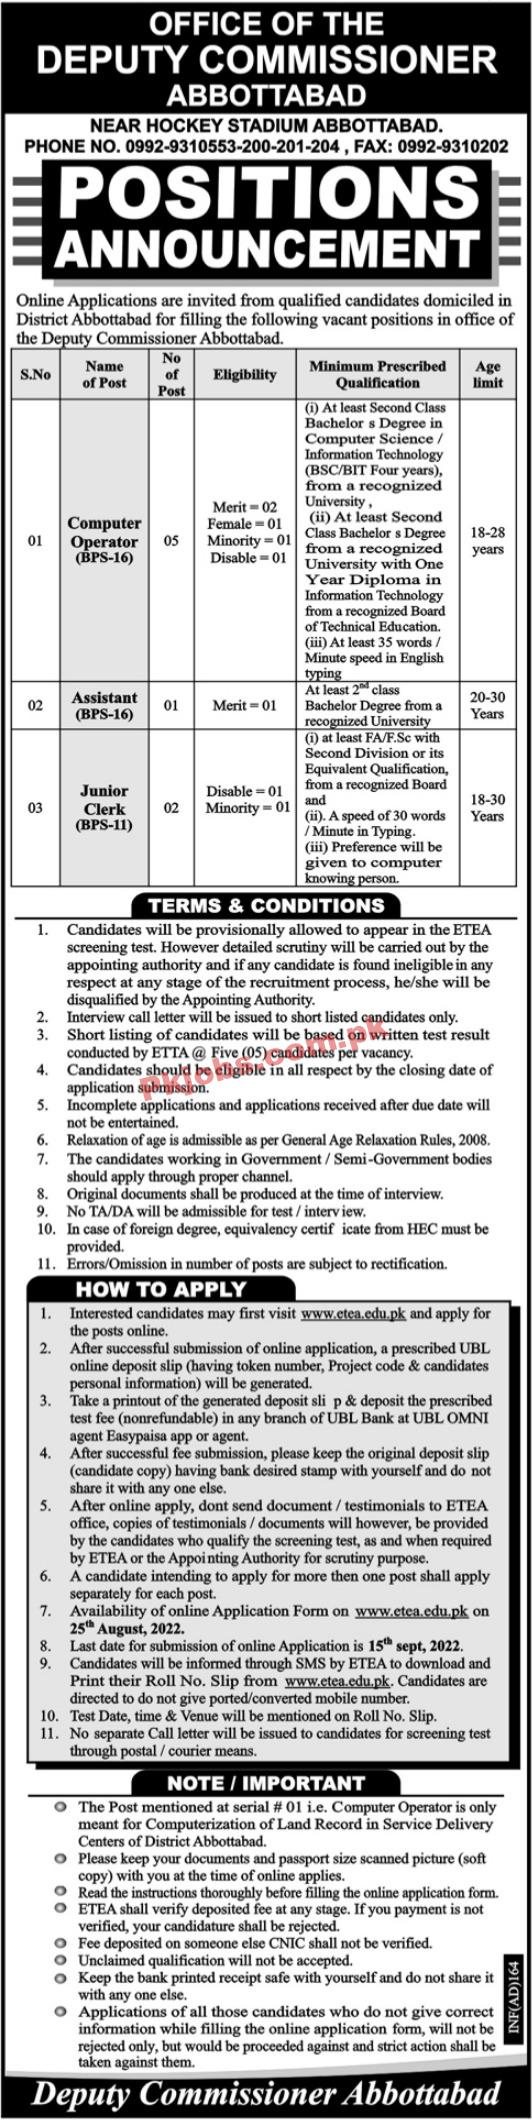 Deputy Commissioner Office Headquarters Announced Latest Recruitments Jobs 2022